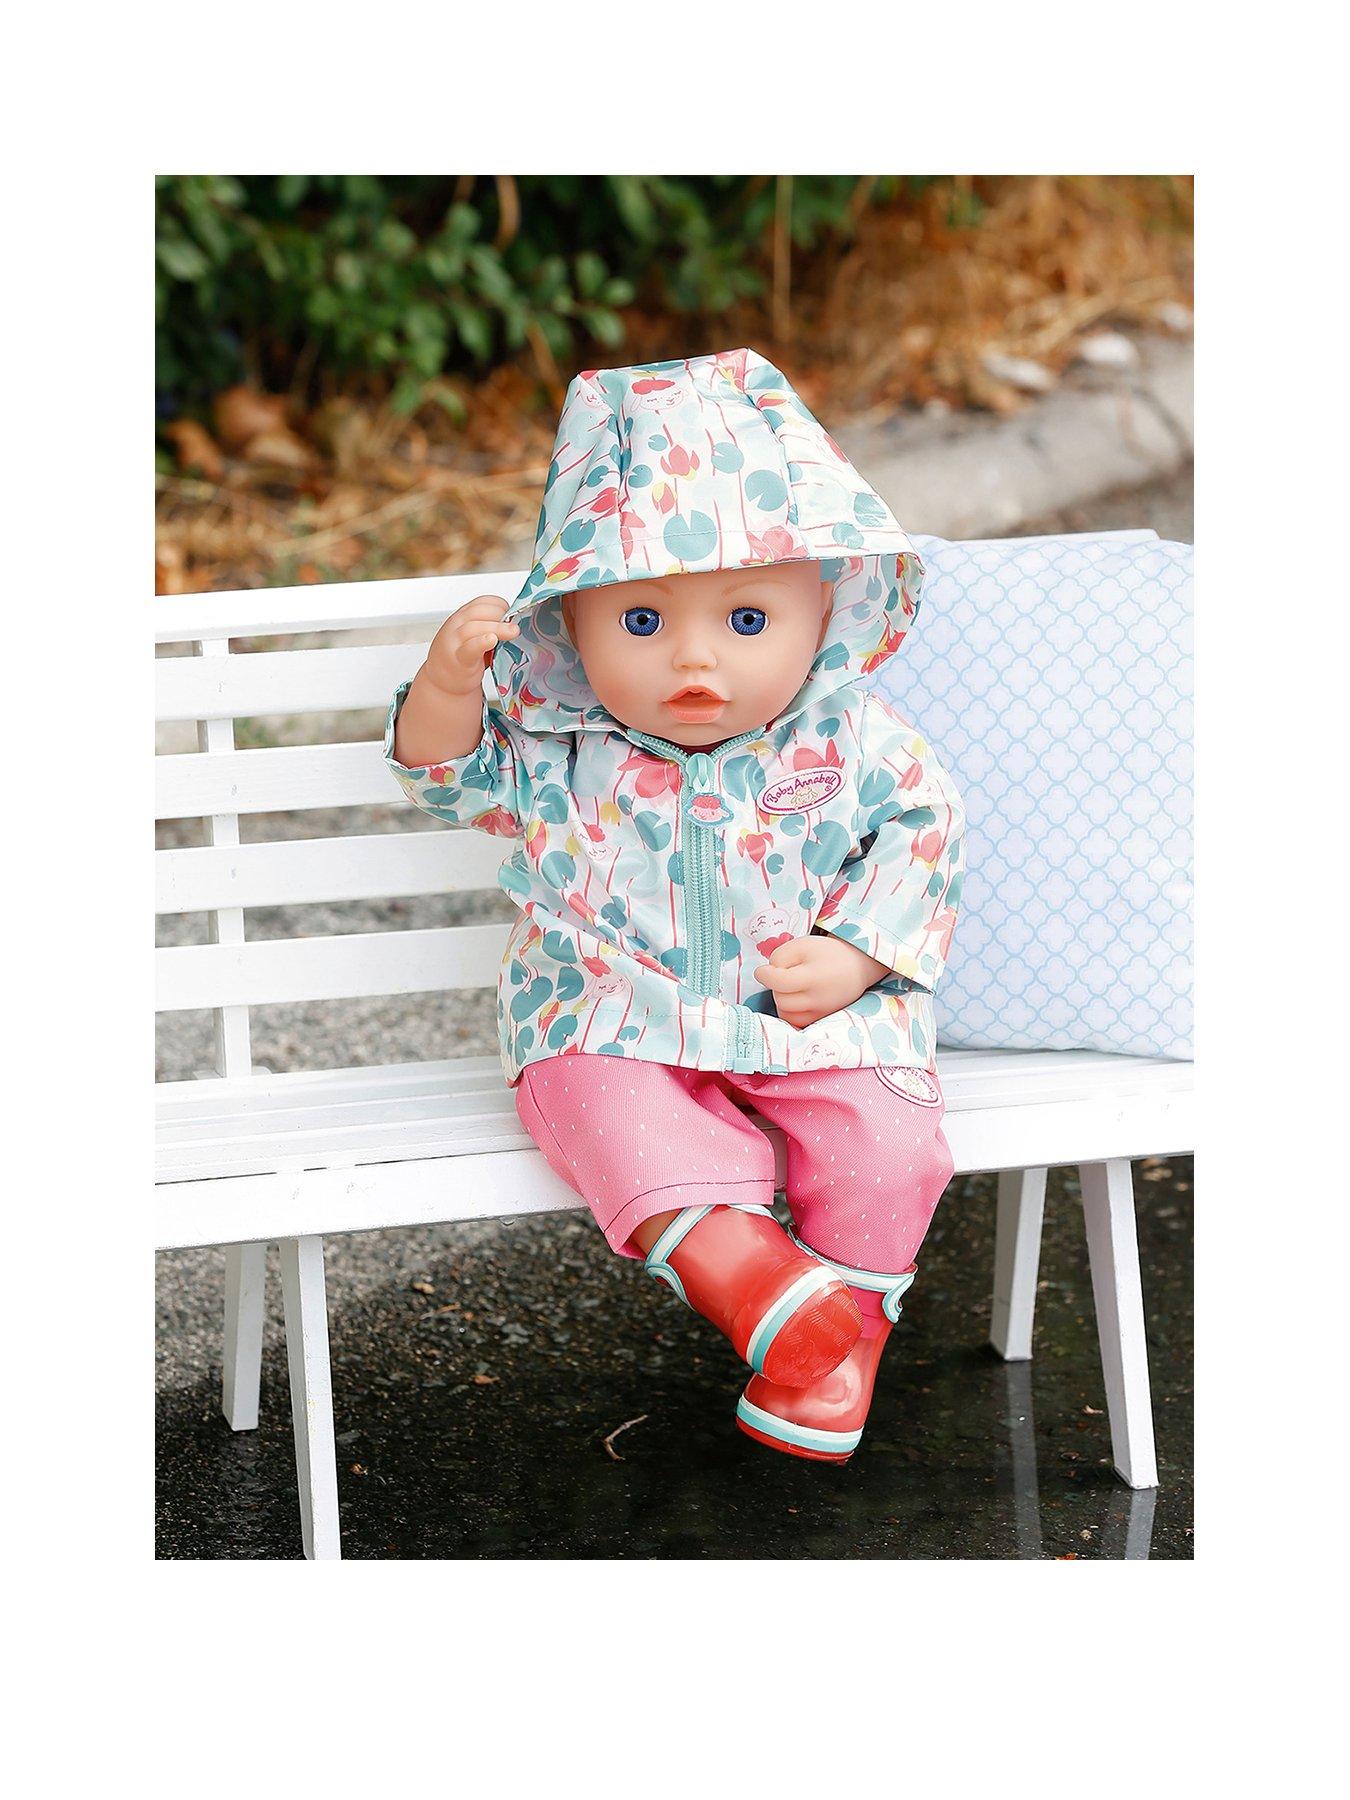 baby annabell clothing